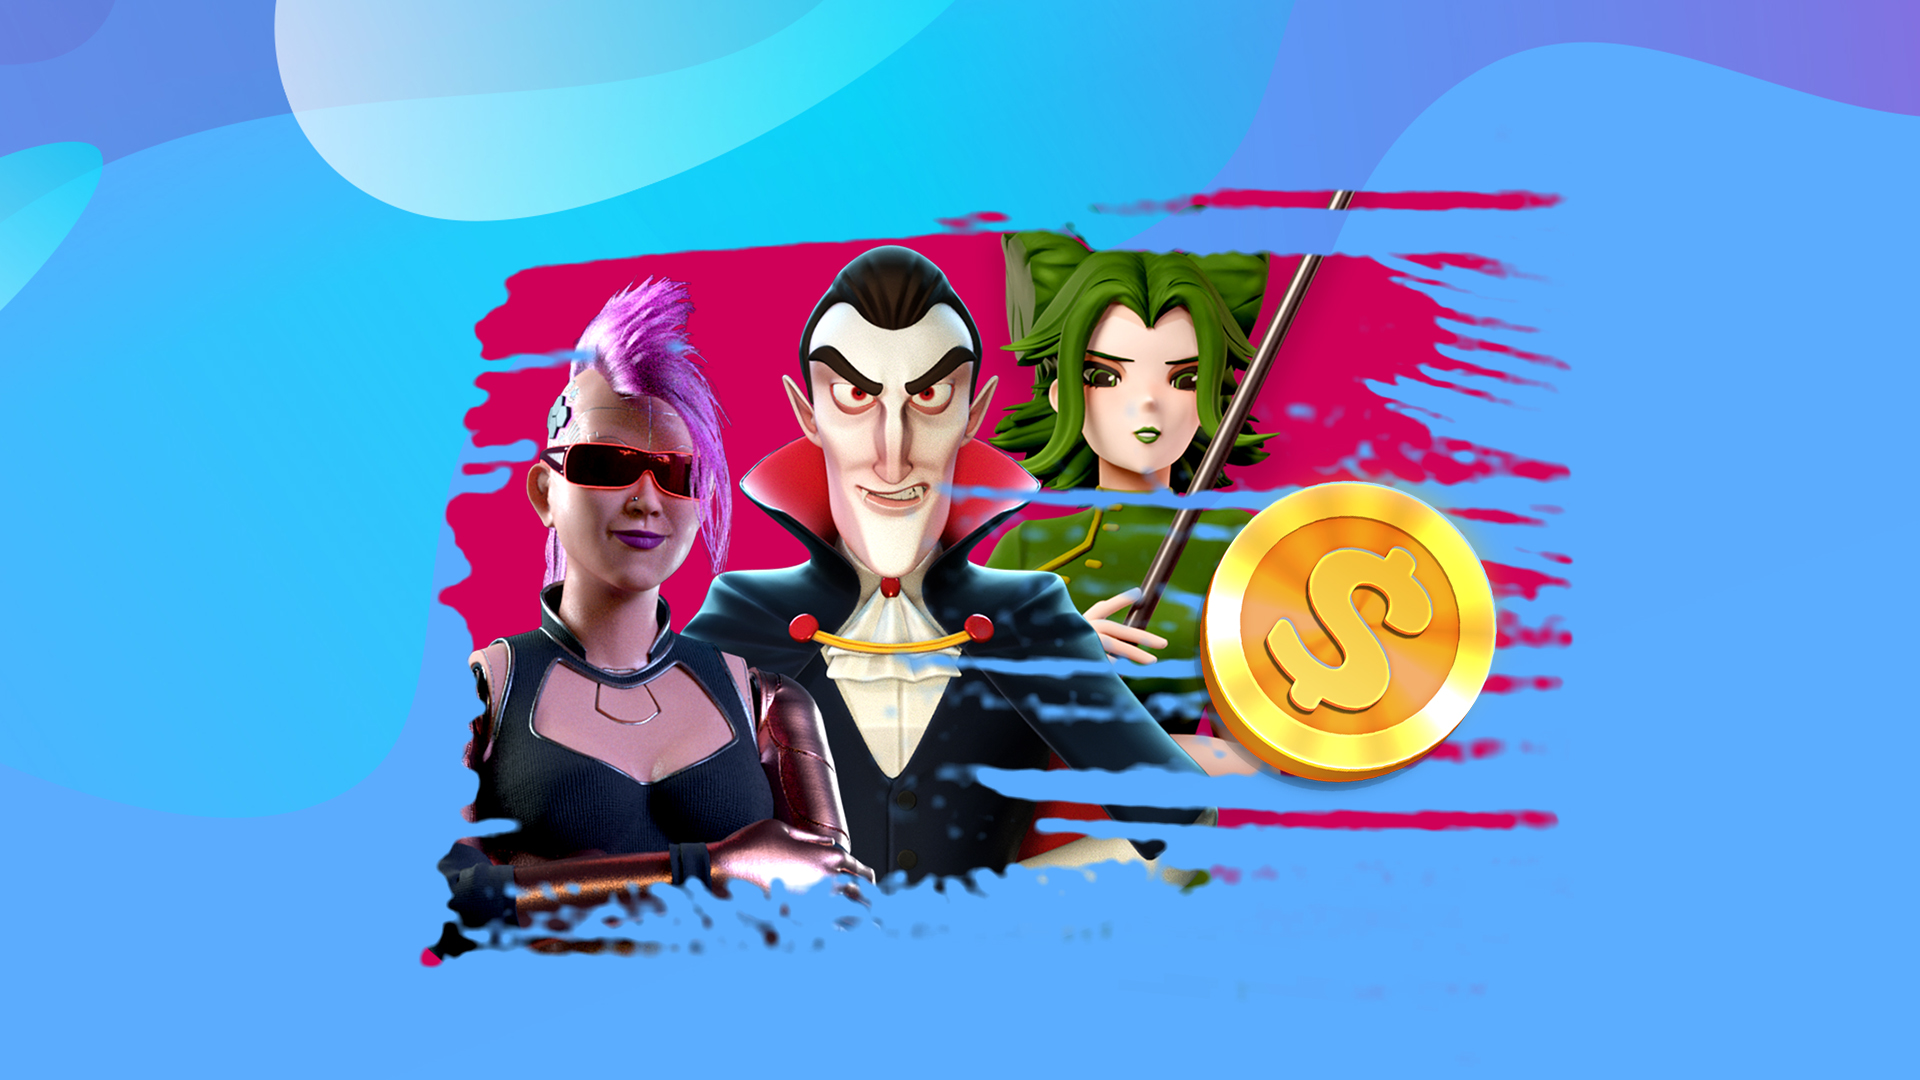 A punk-rock lady with a pink mohawk is on the left, a scowling vampire is in the middle, and a green-haired character as well as a gold coin are on the right. The background is pink and light blue.